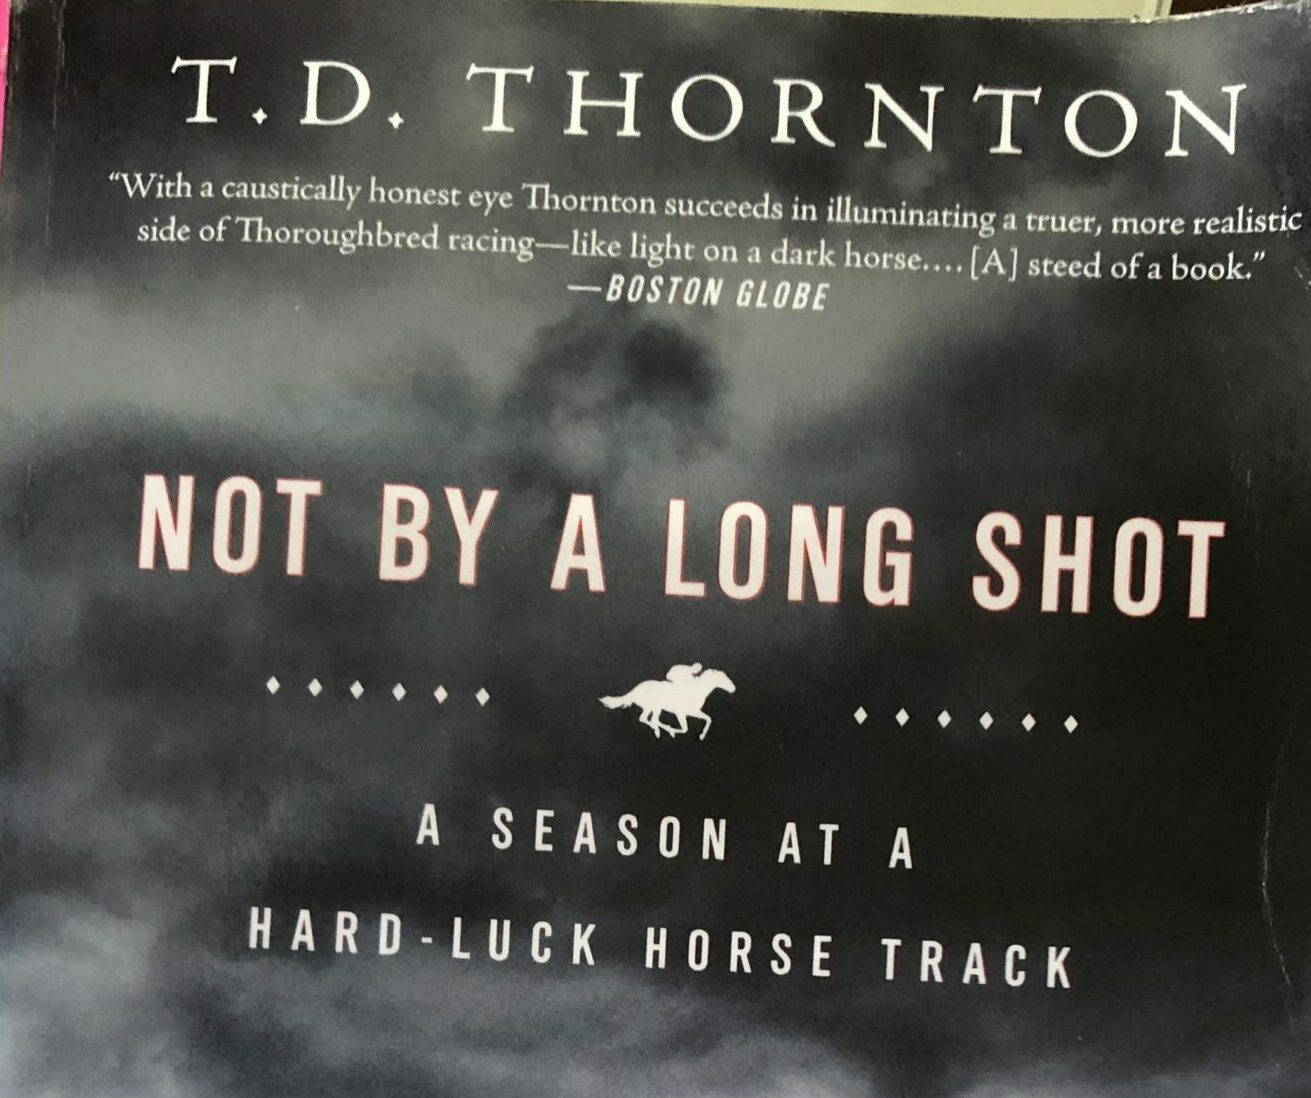 Not by a Long Shot by T.D. Thornton